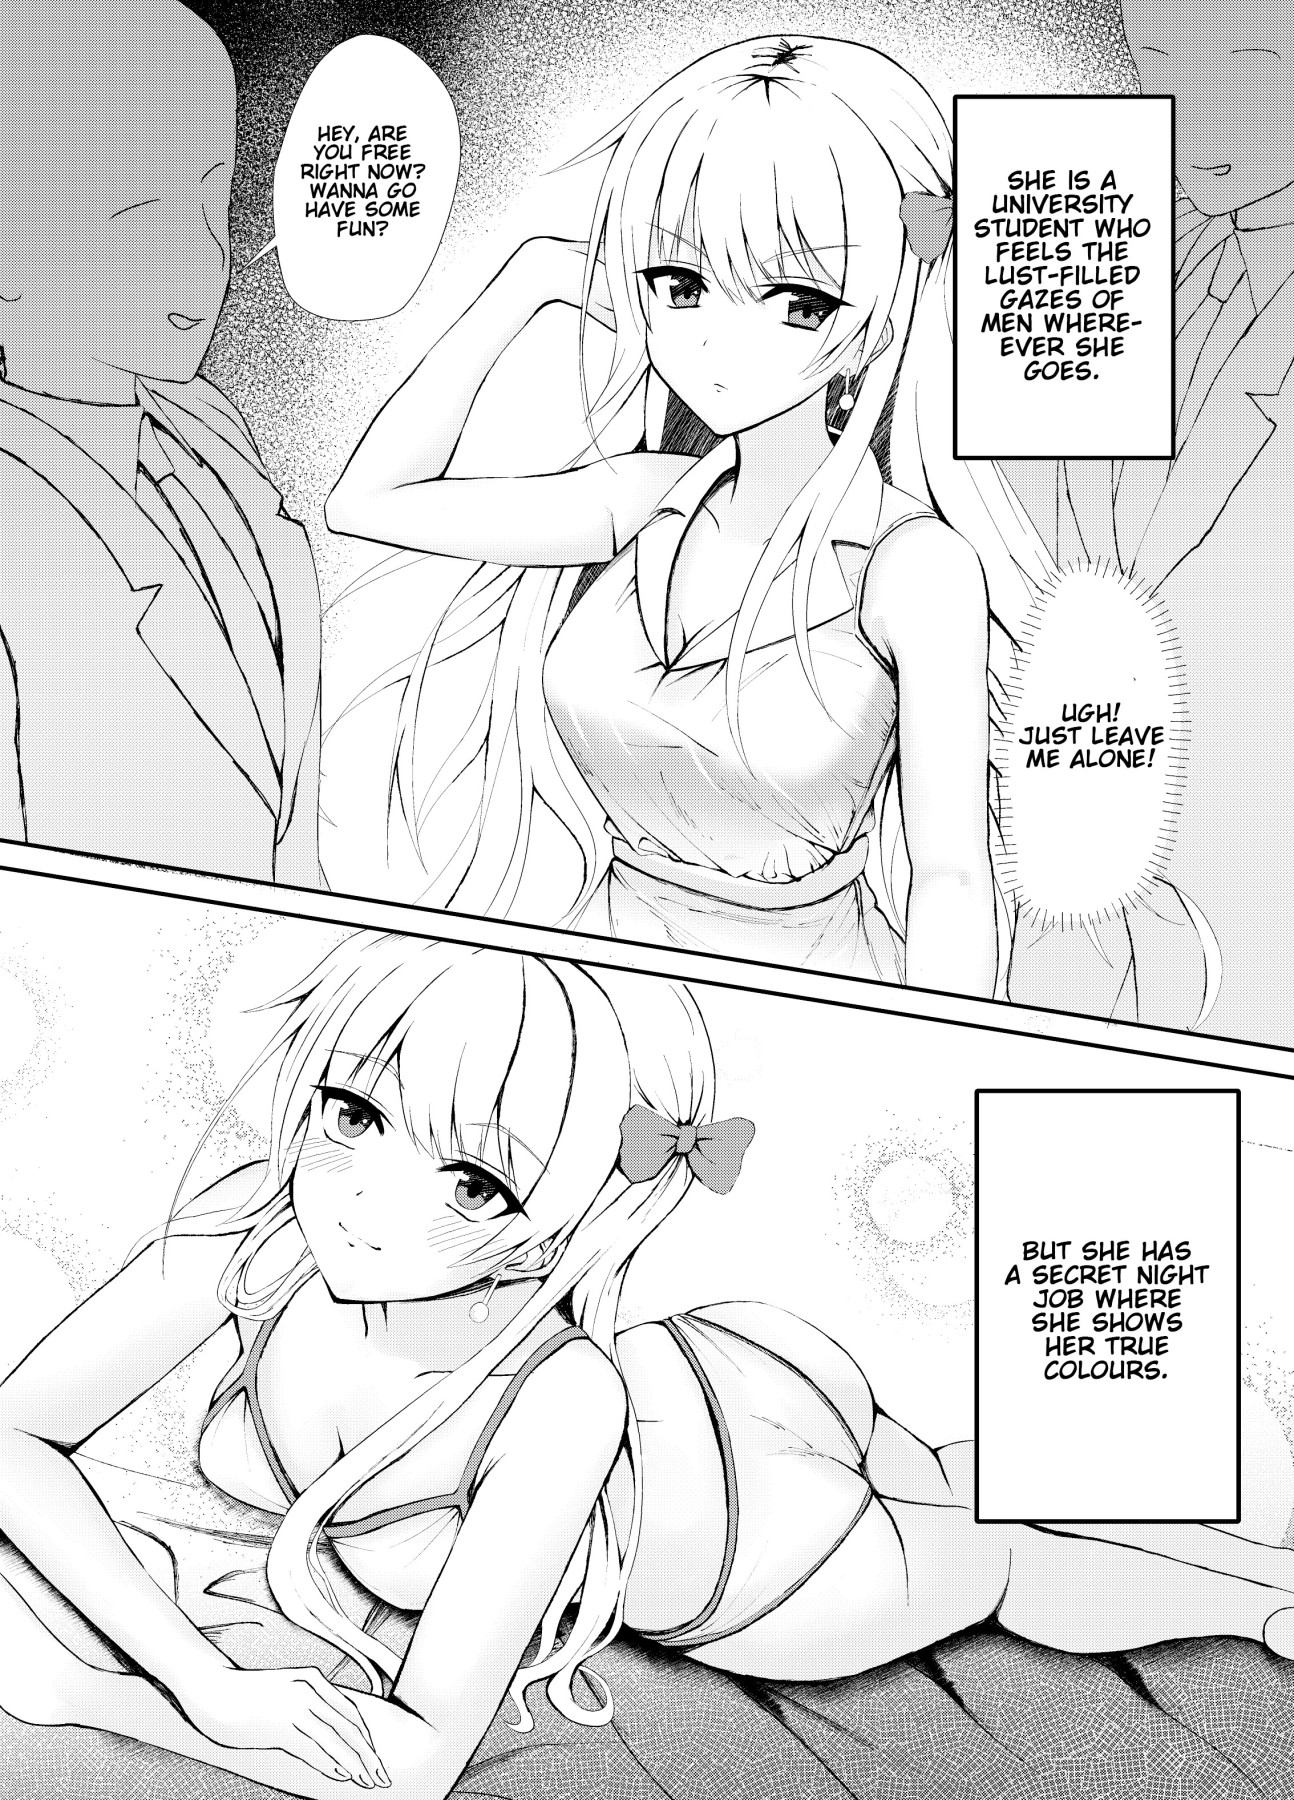 Hentai Manga Comic-A Manga About a Girl Who Does Has No Interest in People She Knows, but Fucks Like a Rabbit Behind Closed Doors-Read-1